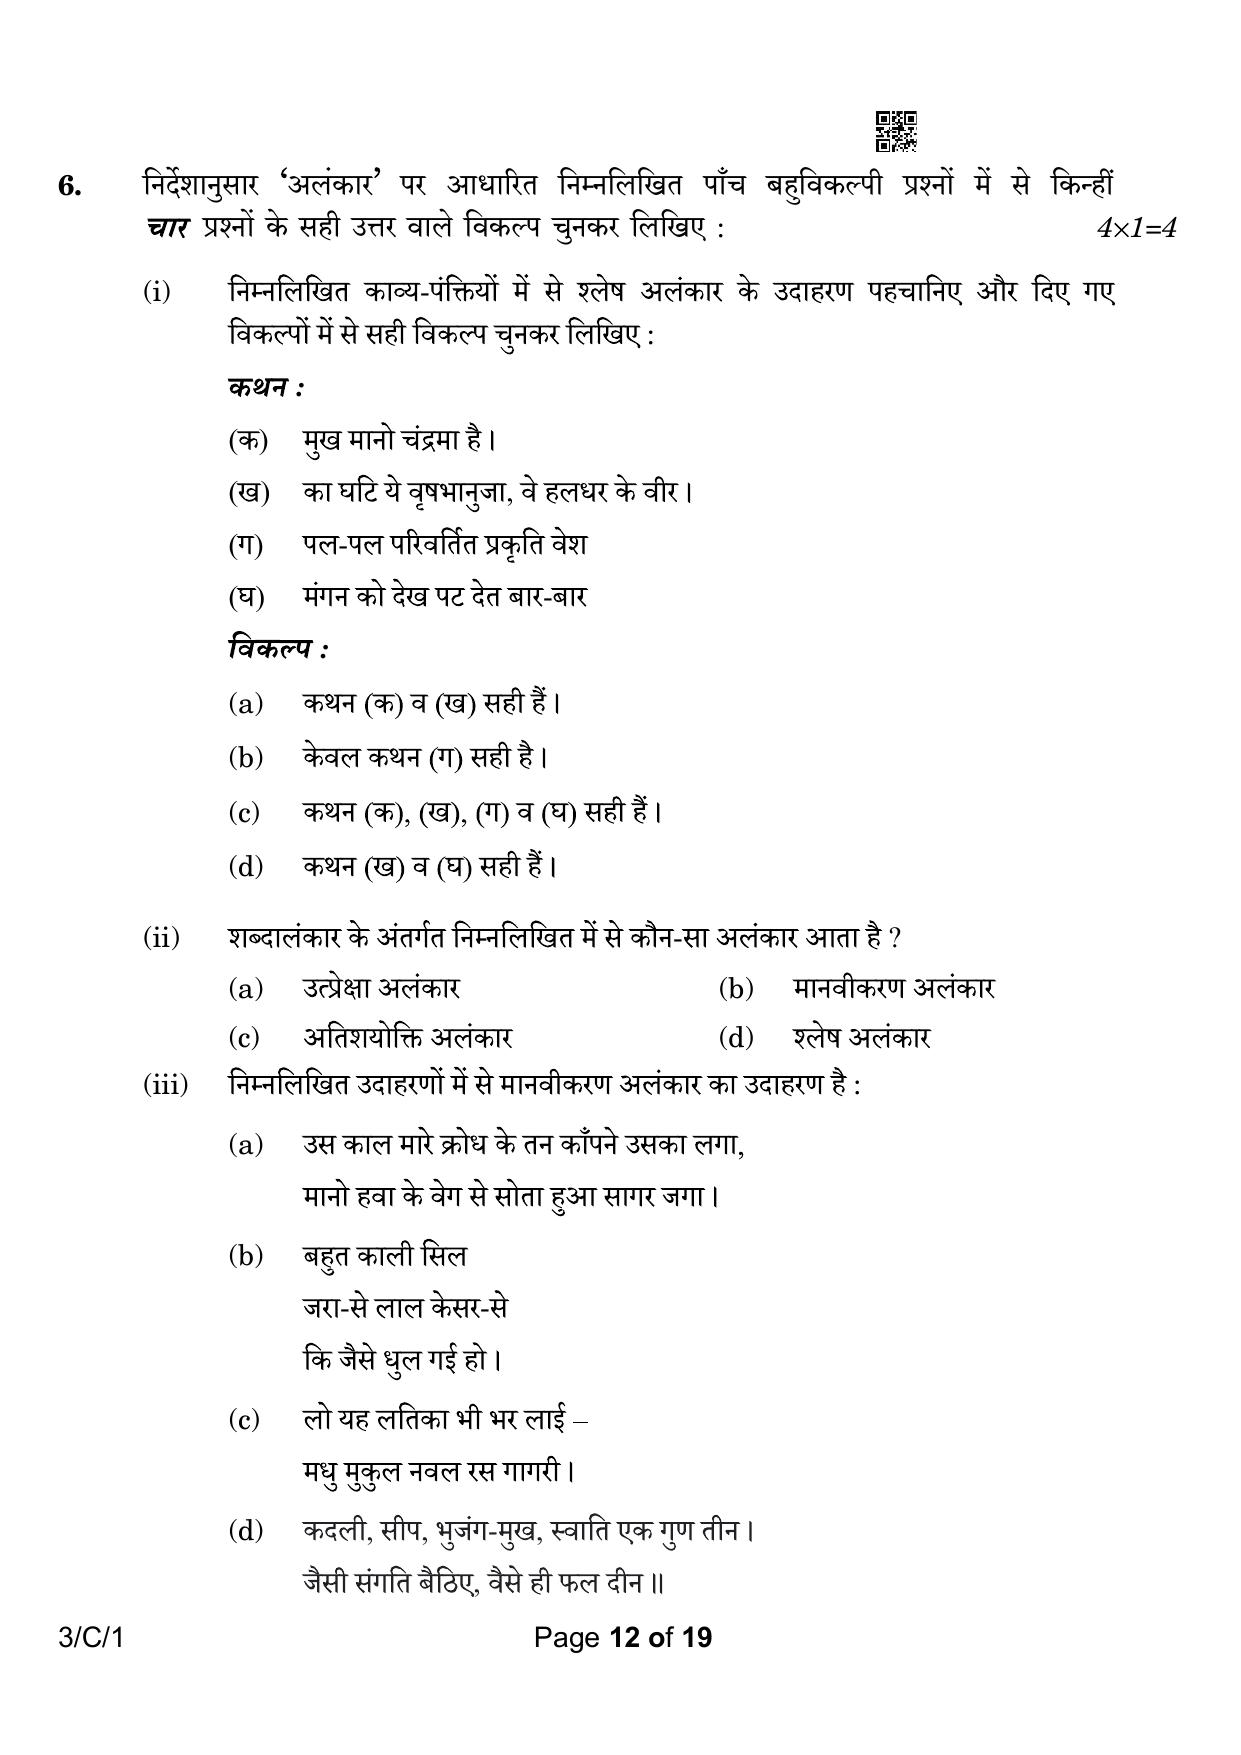 CBSE Class 10 3-1 Hindi A 2023 (Compartment) Question Paper - Page 12